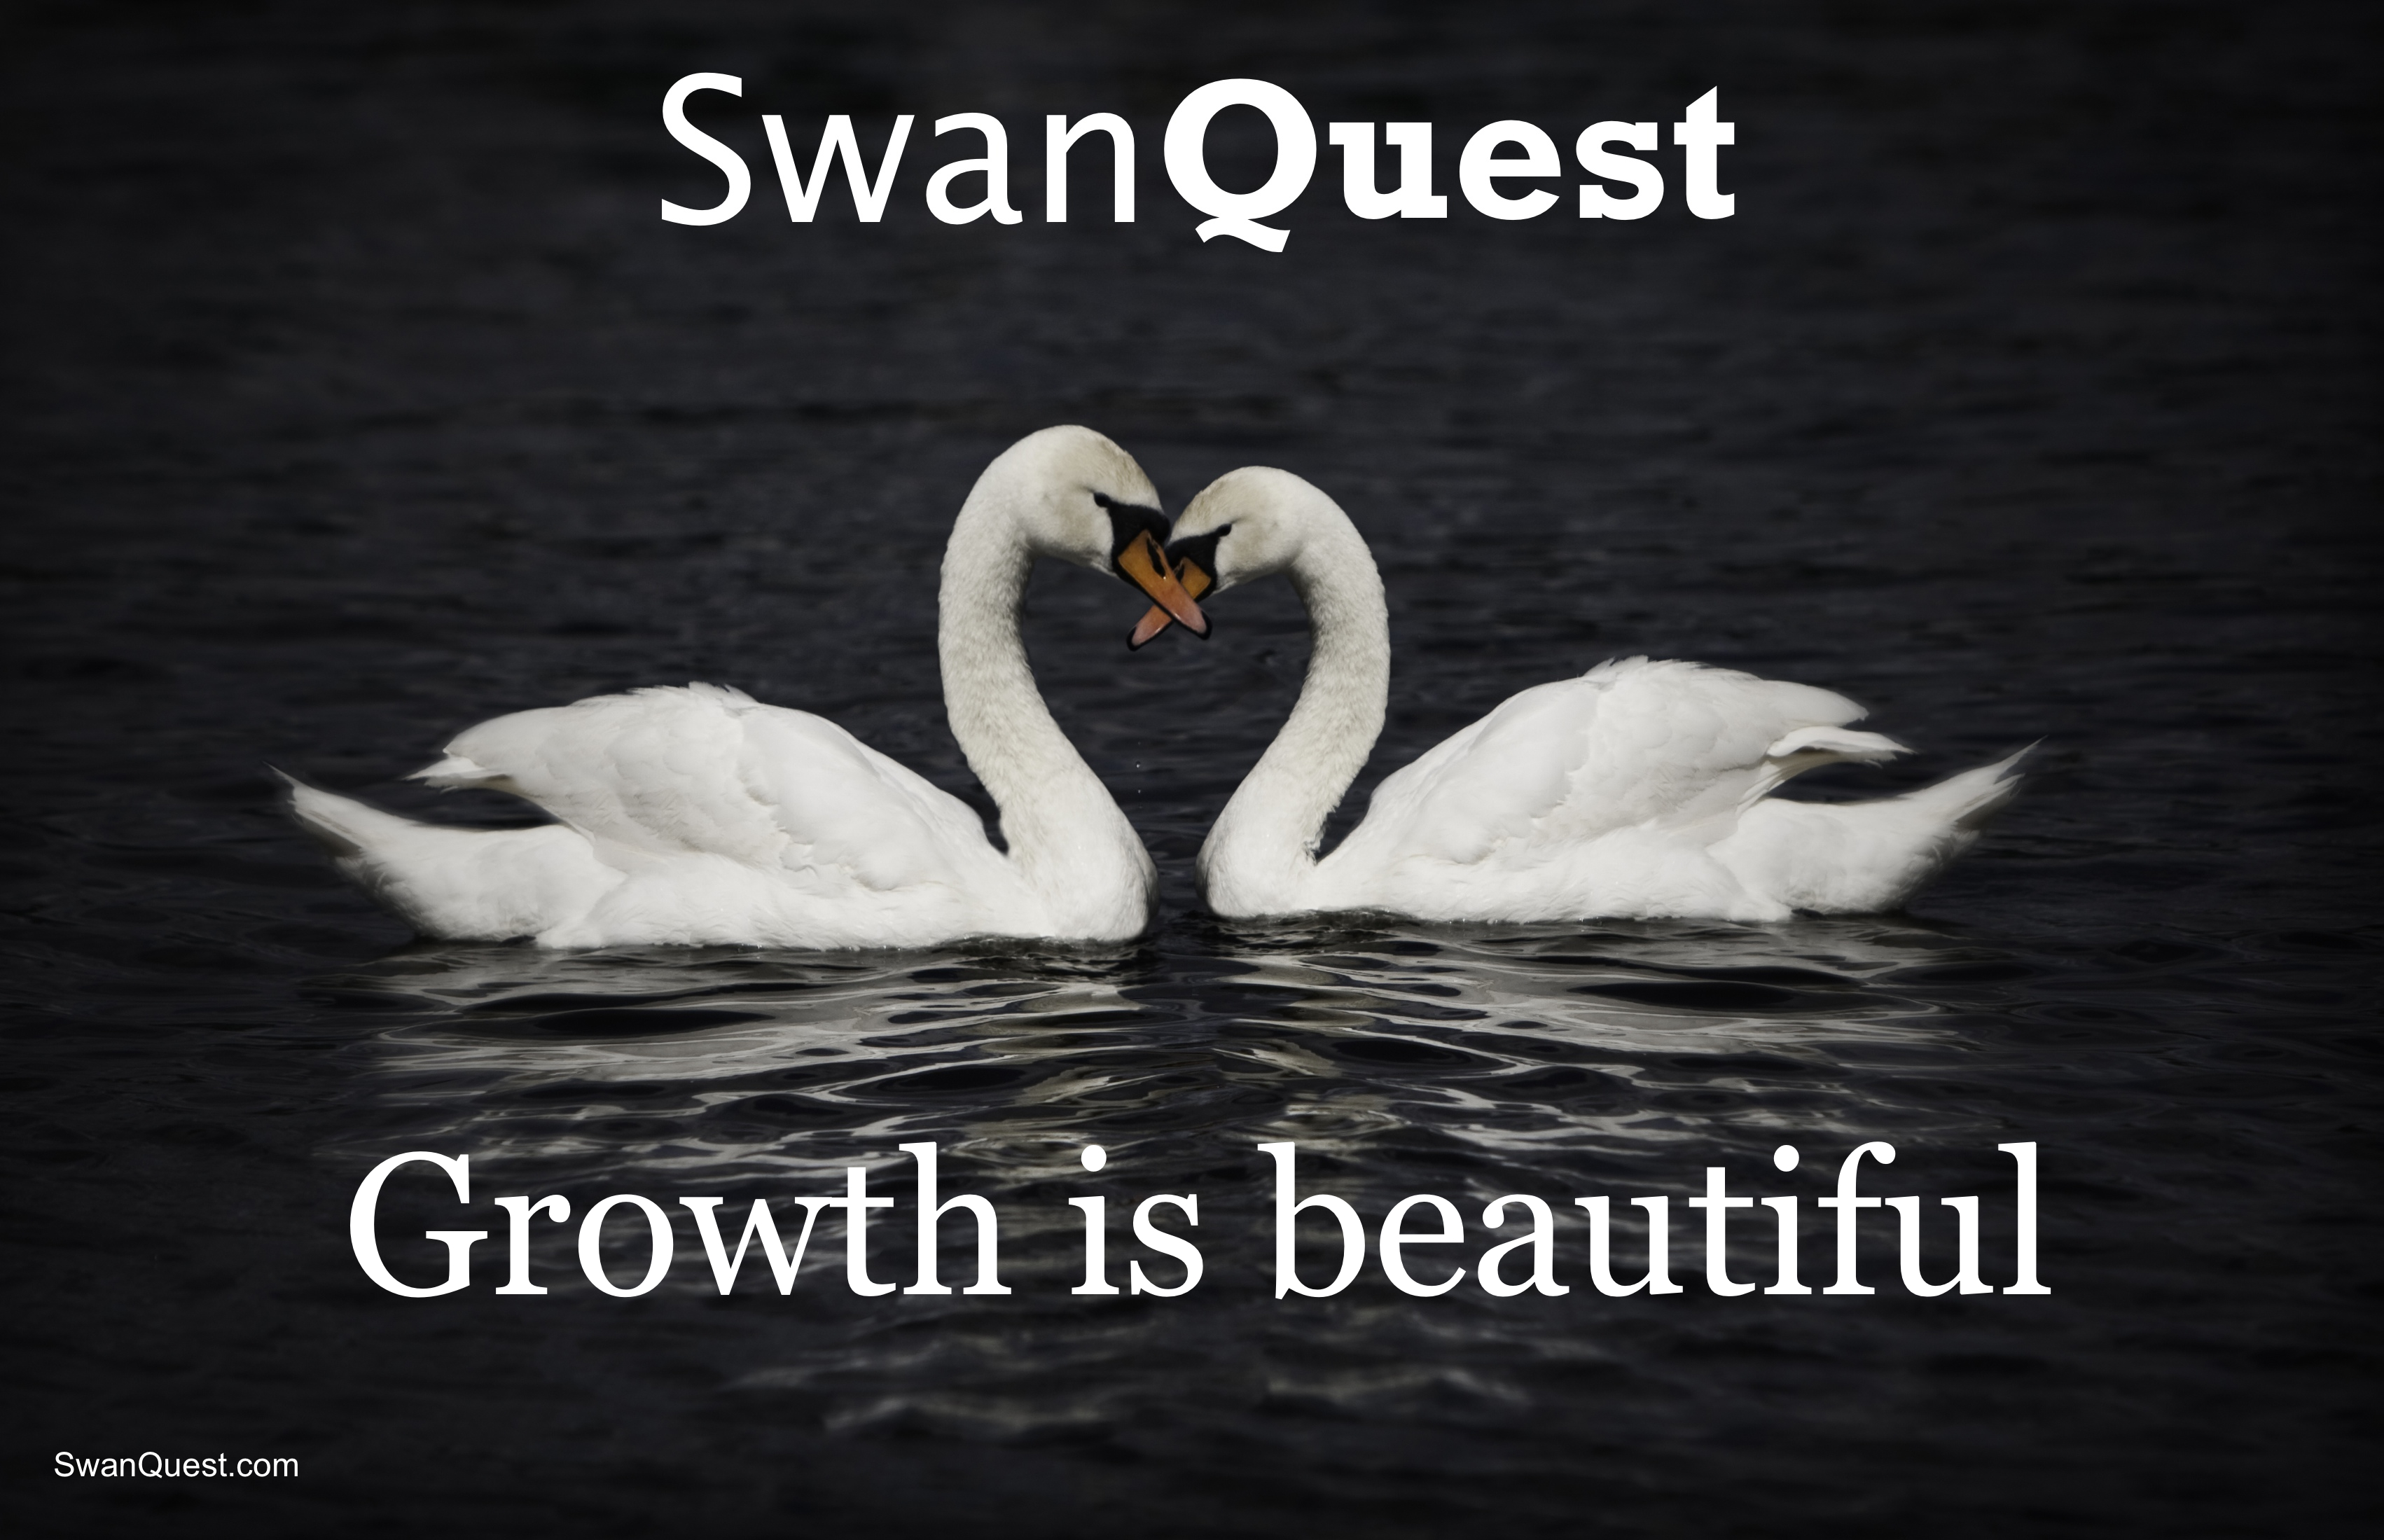 SwanQuest